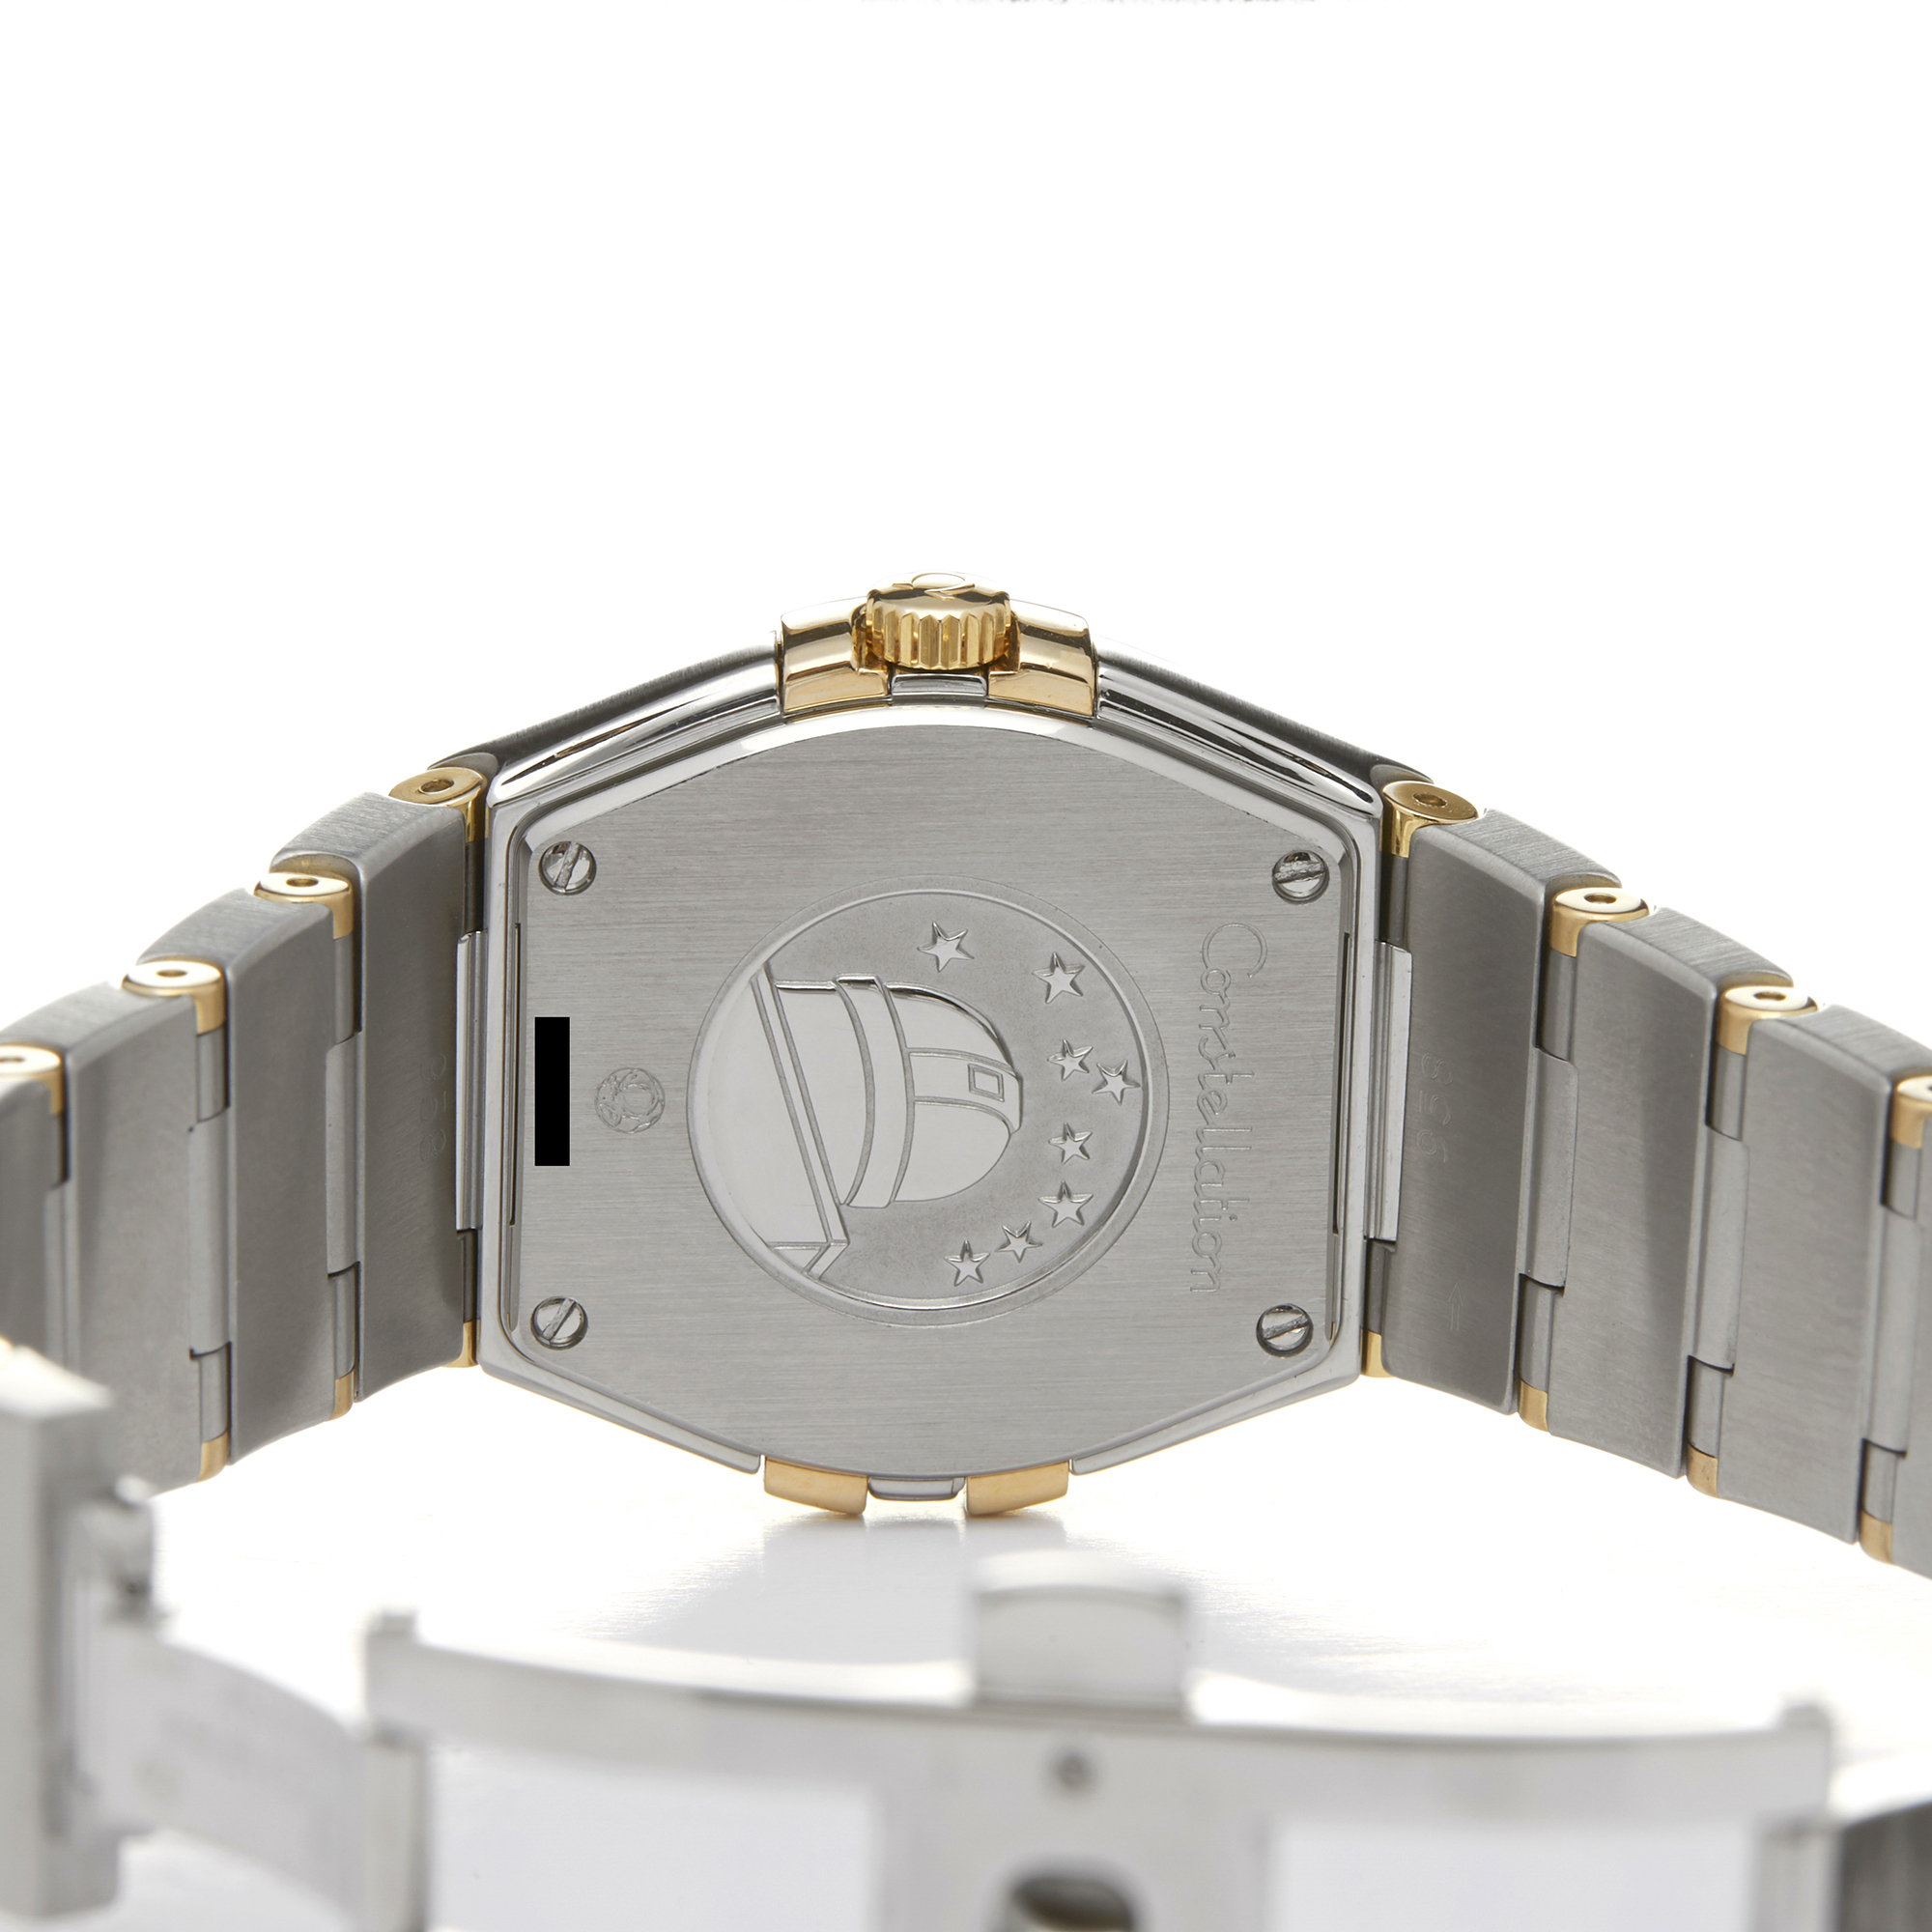 2010 Omega Constellation Stainless Steel & Yellow Gold - 123.20.27.60.02.004 - Image 3 of 7